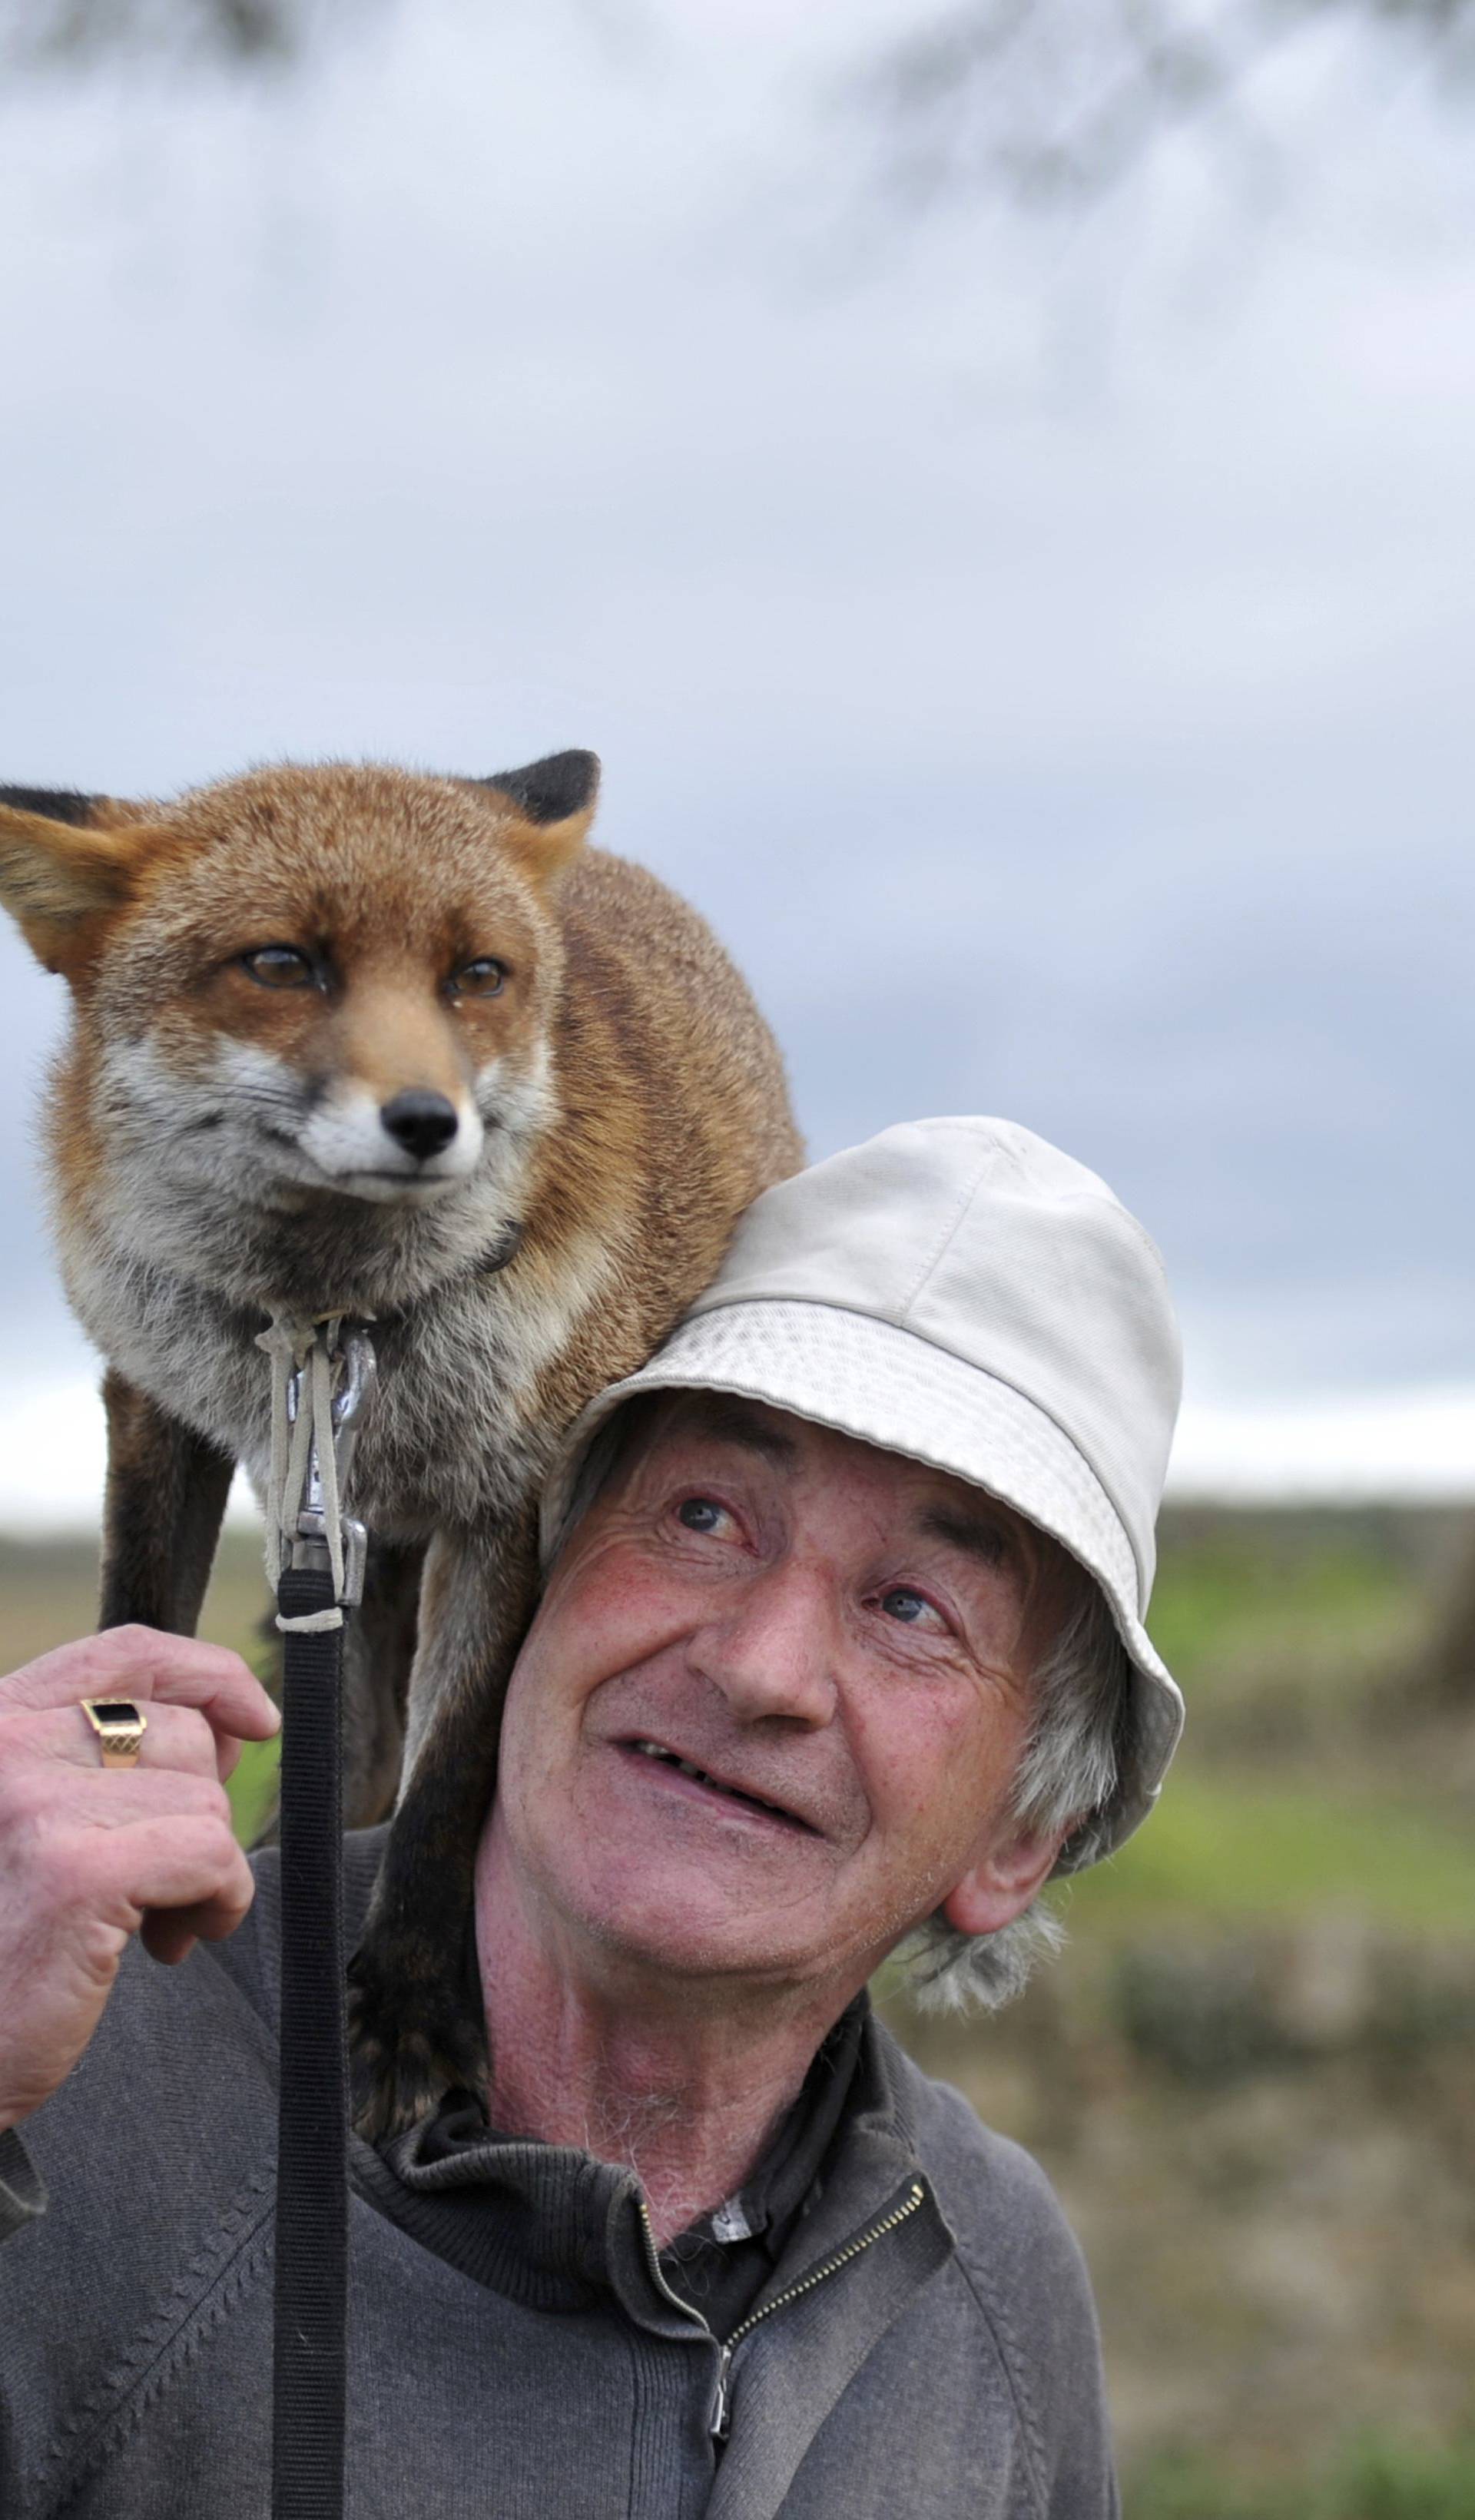 Patsy Gibbons takes his rescue foxes Grainne and Minnie for a walk in Kilkenny